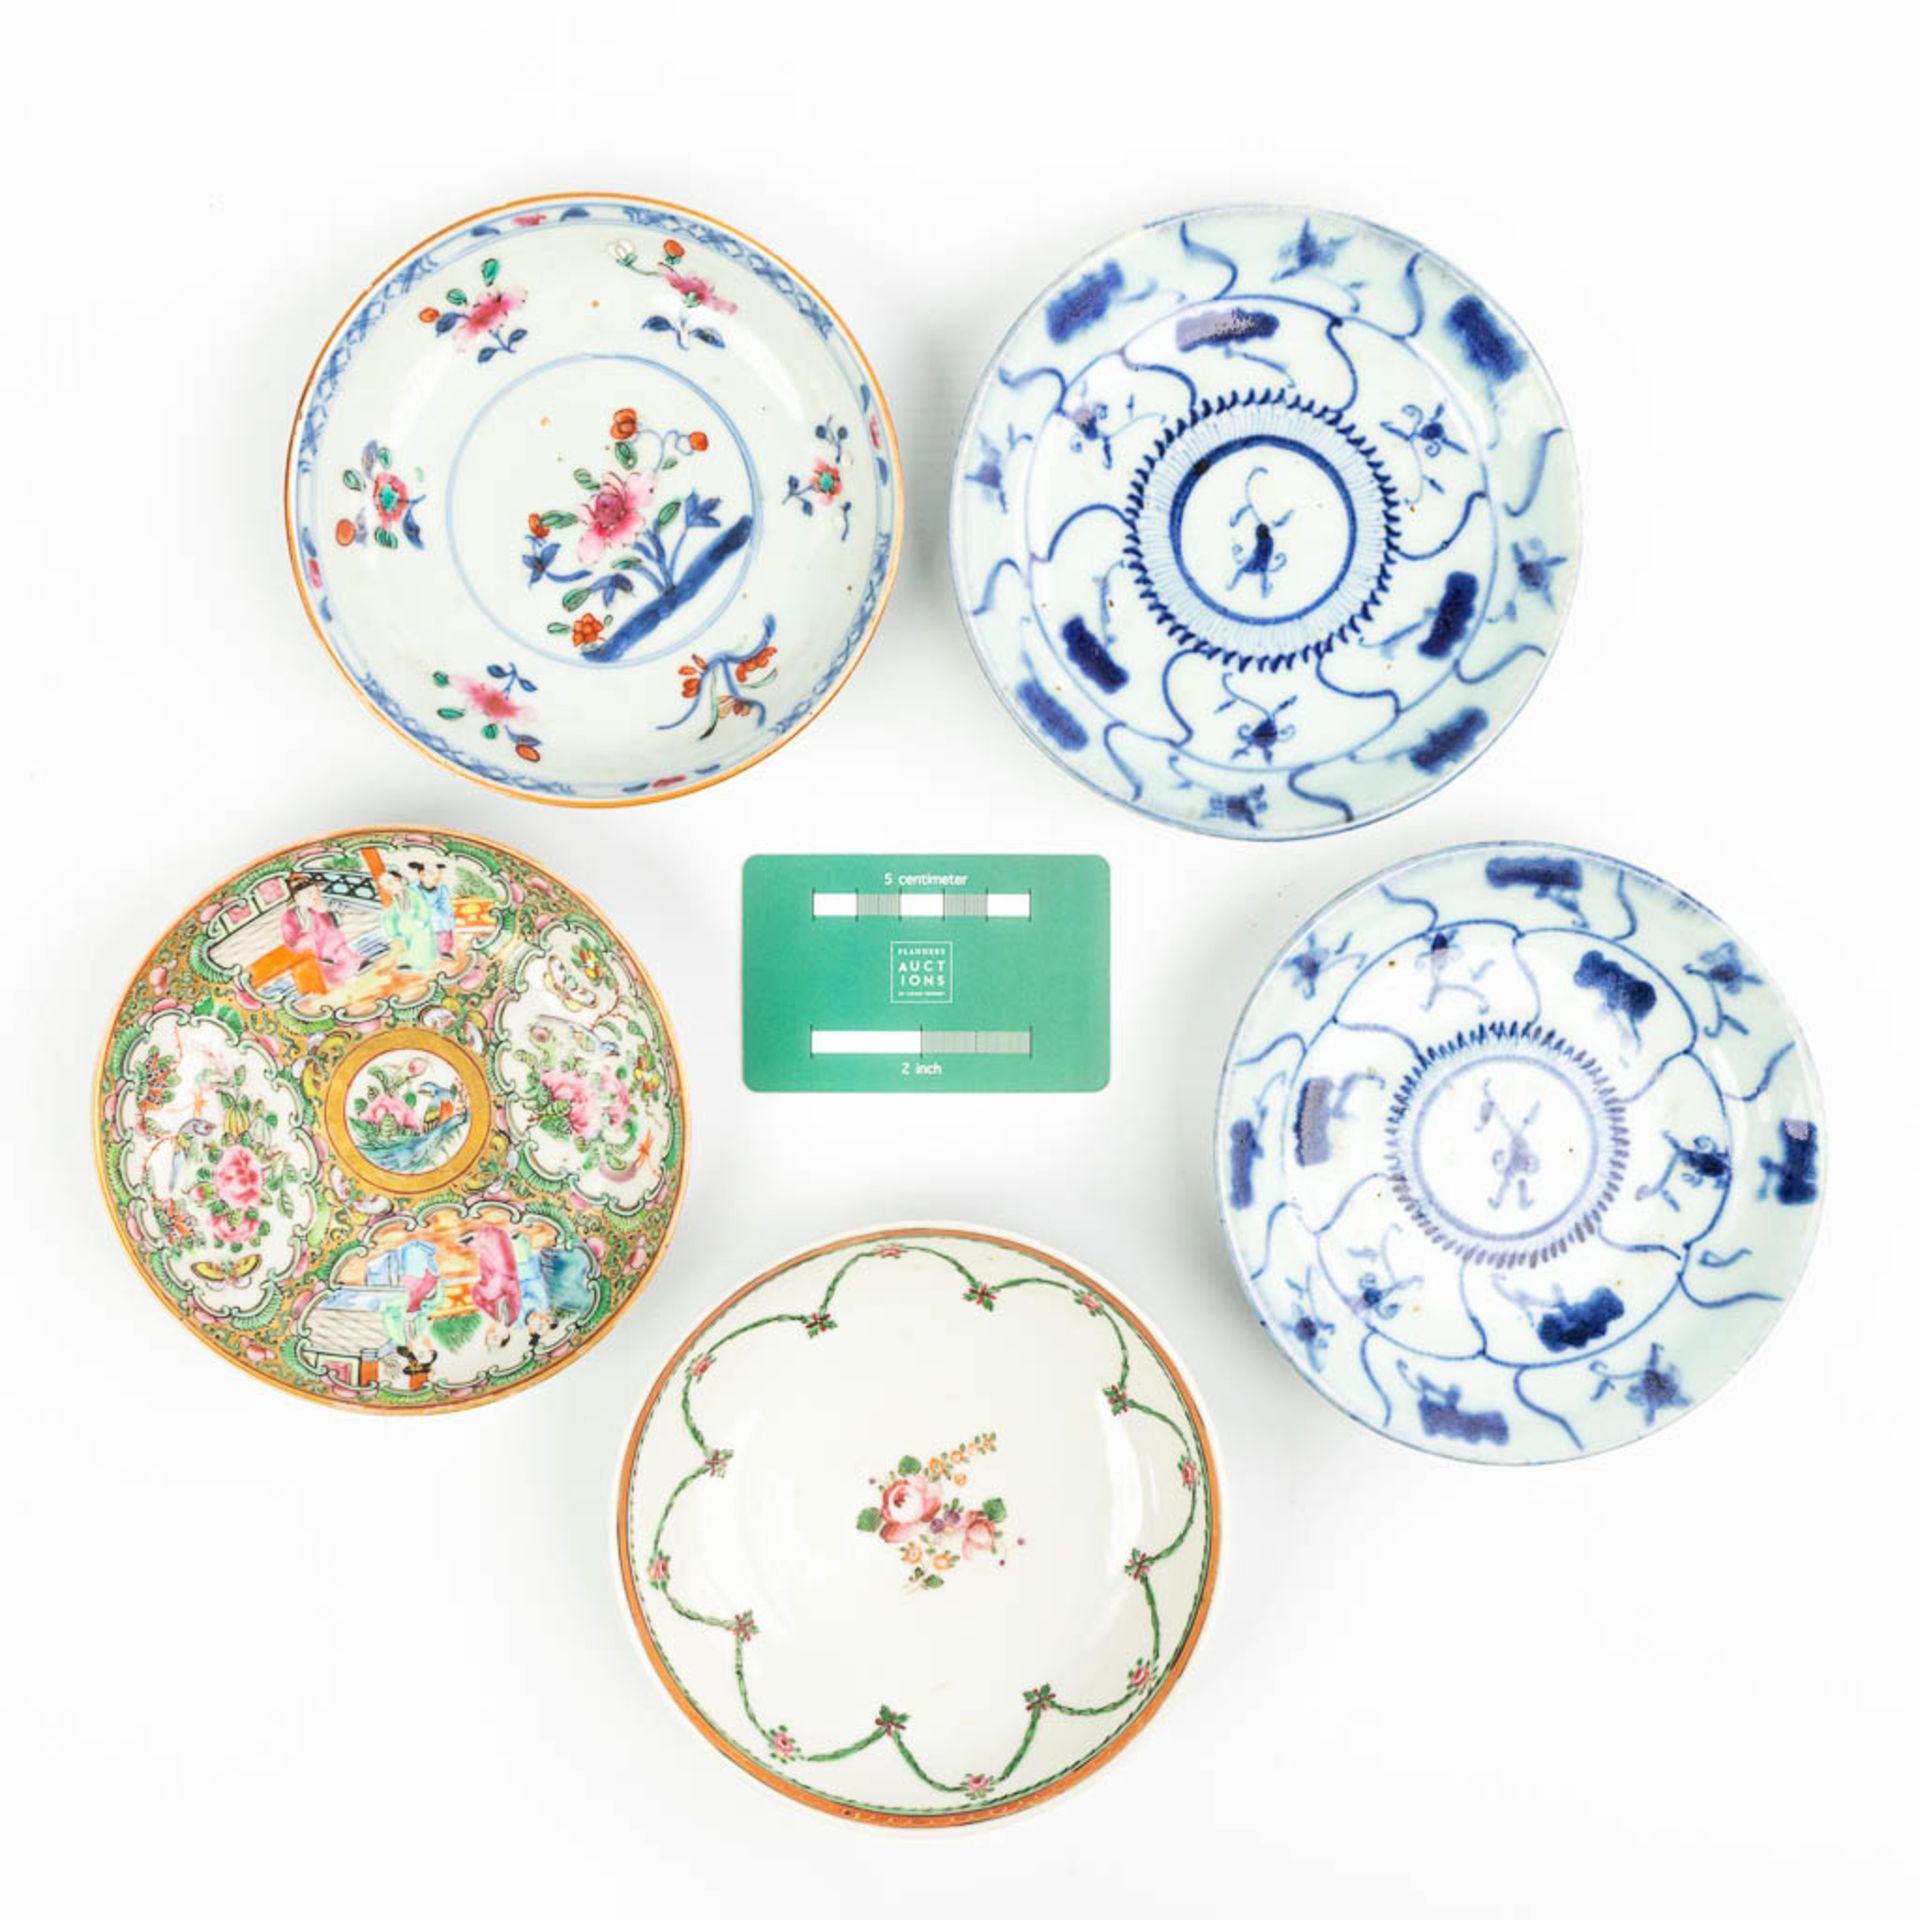 A collection of 5 plates made of Chinese porcelain with different patterns. - Image 13 of 15